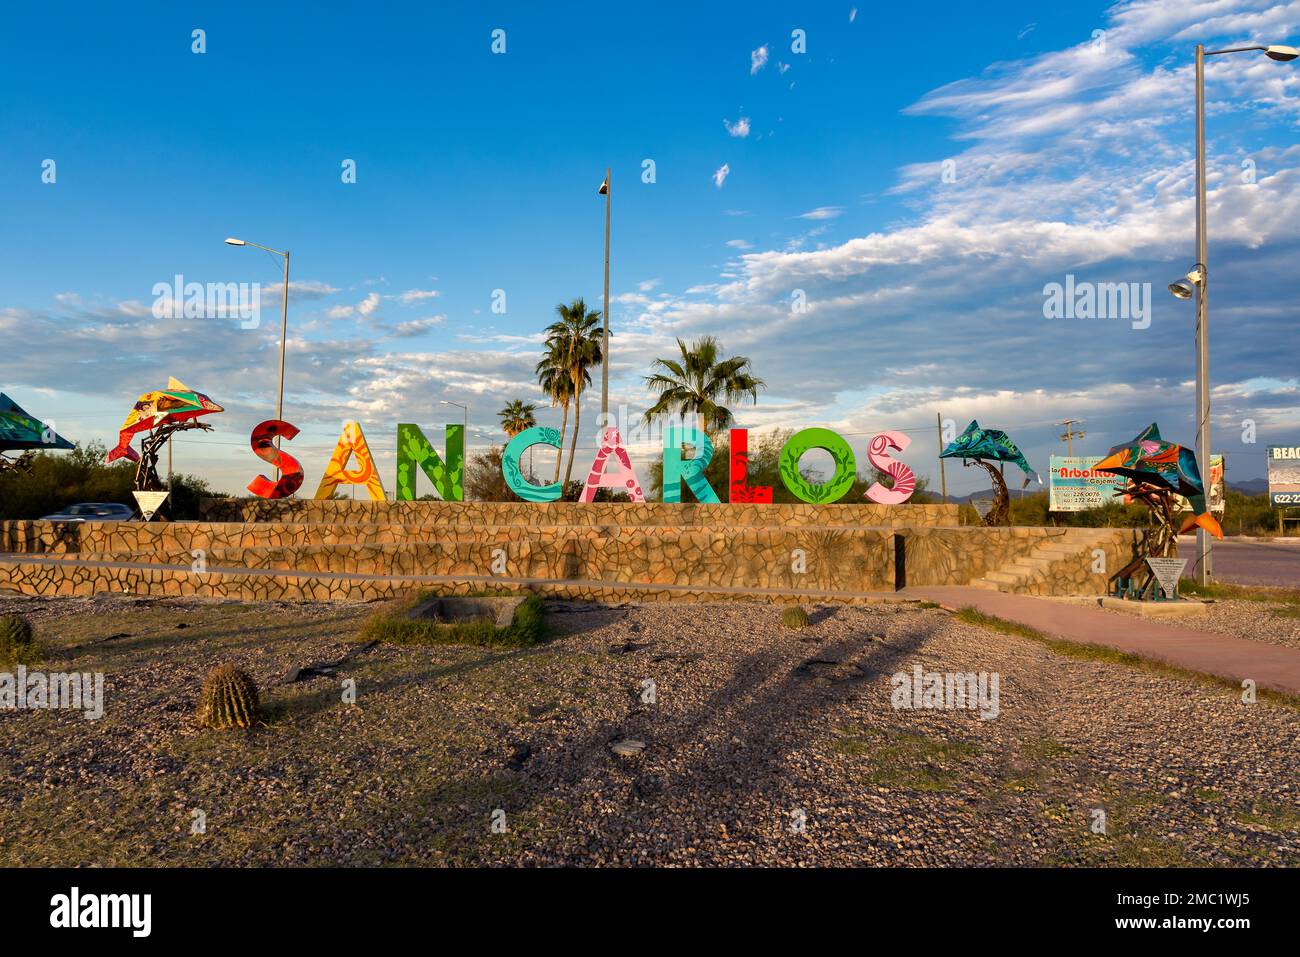 Brightly colored block letters for spelling out San Carlos welcomes visitors to San Carlos, Sonora, Mexico. Stock Photo